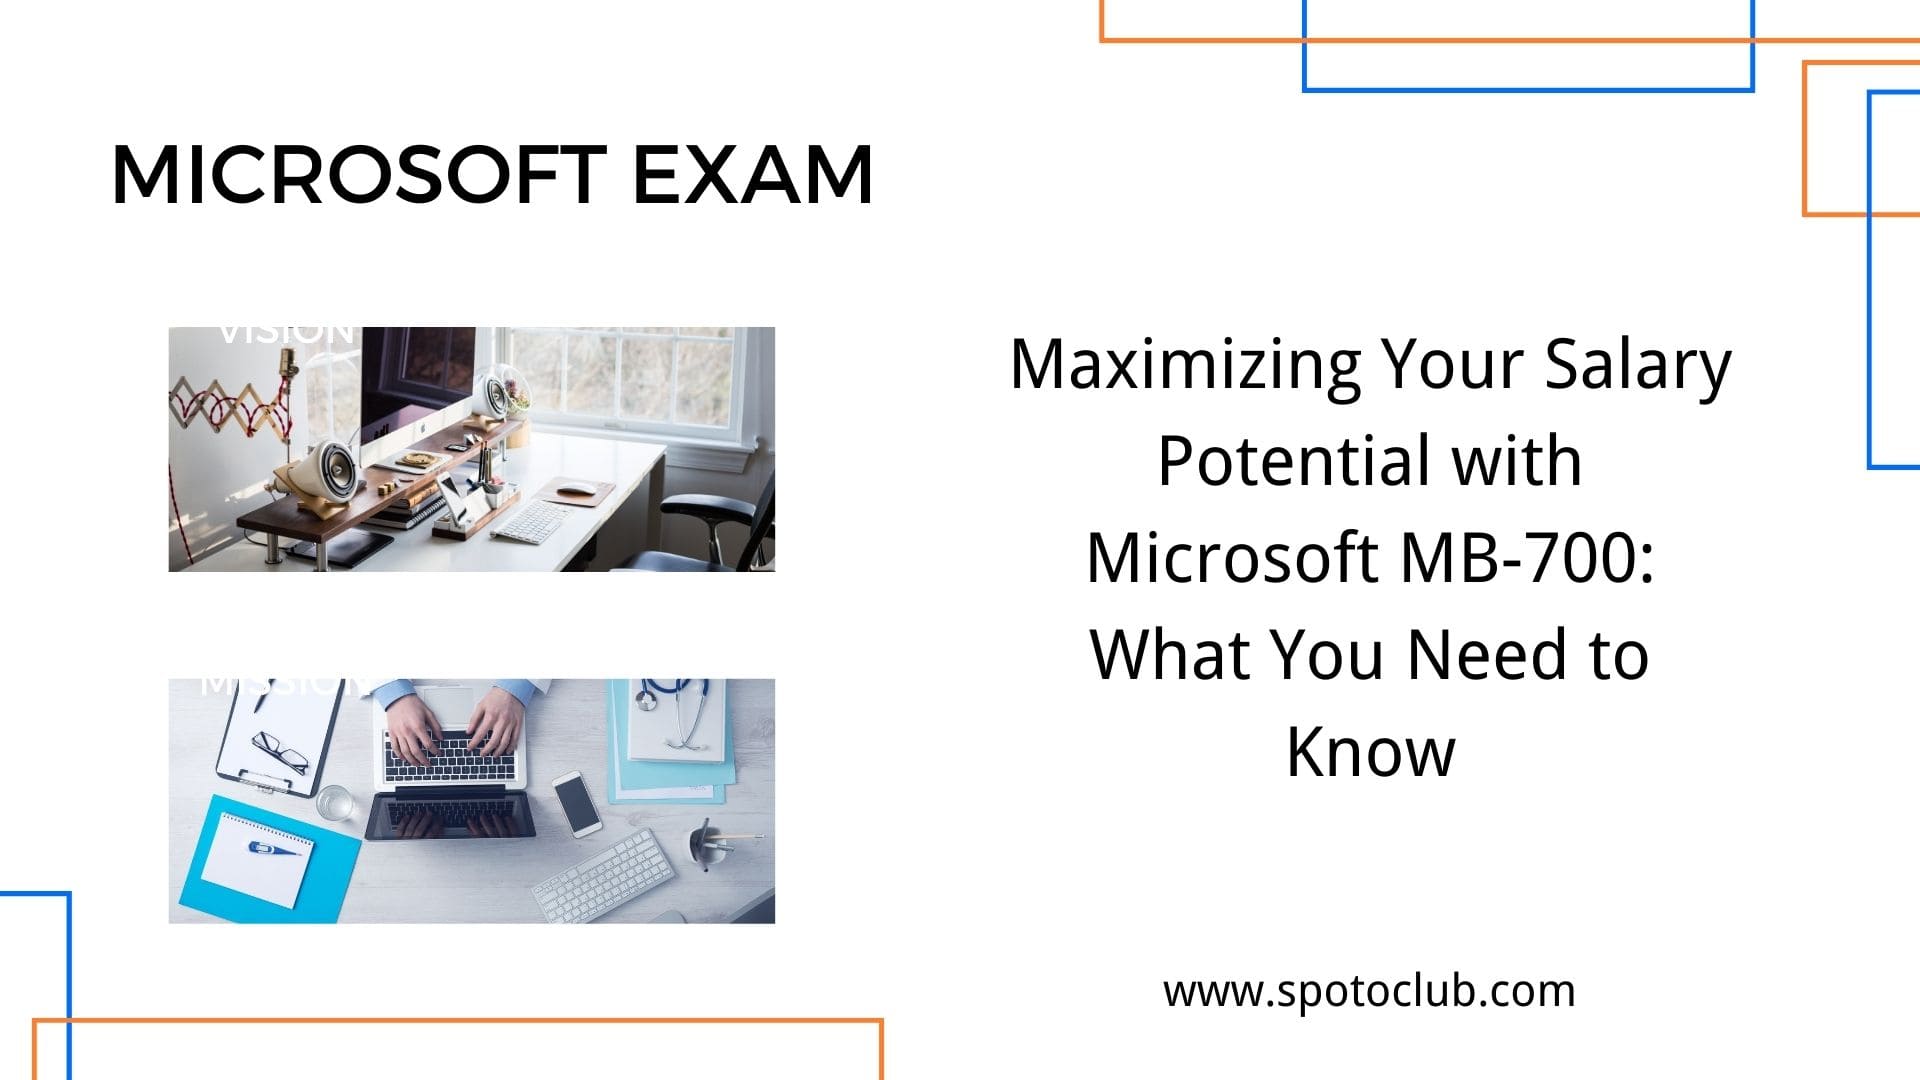 Microsoft MB-700: What You Need to Know